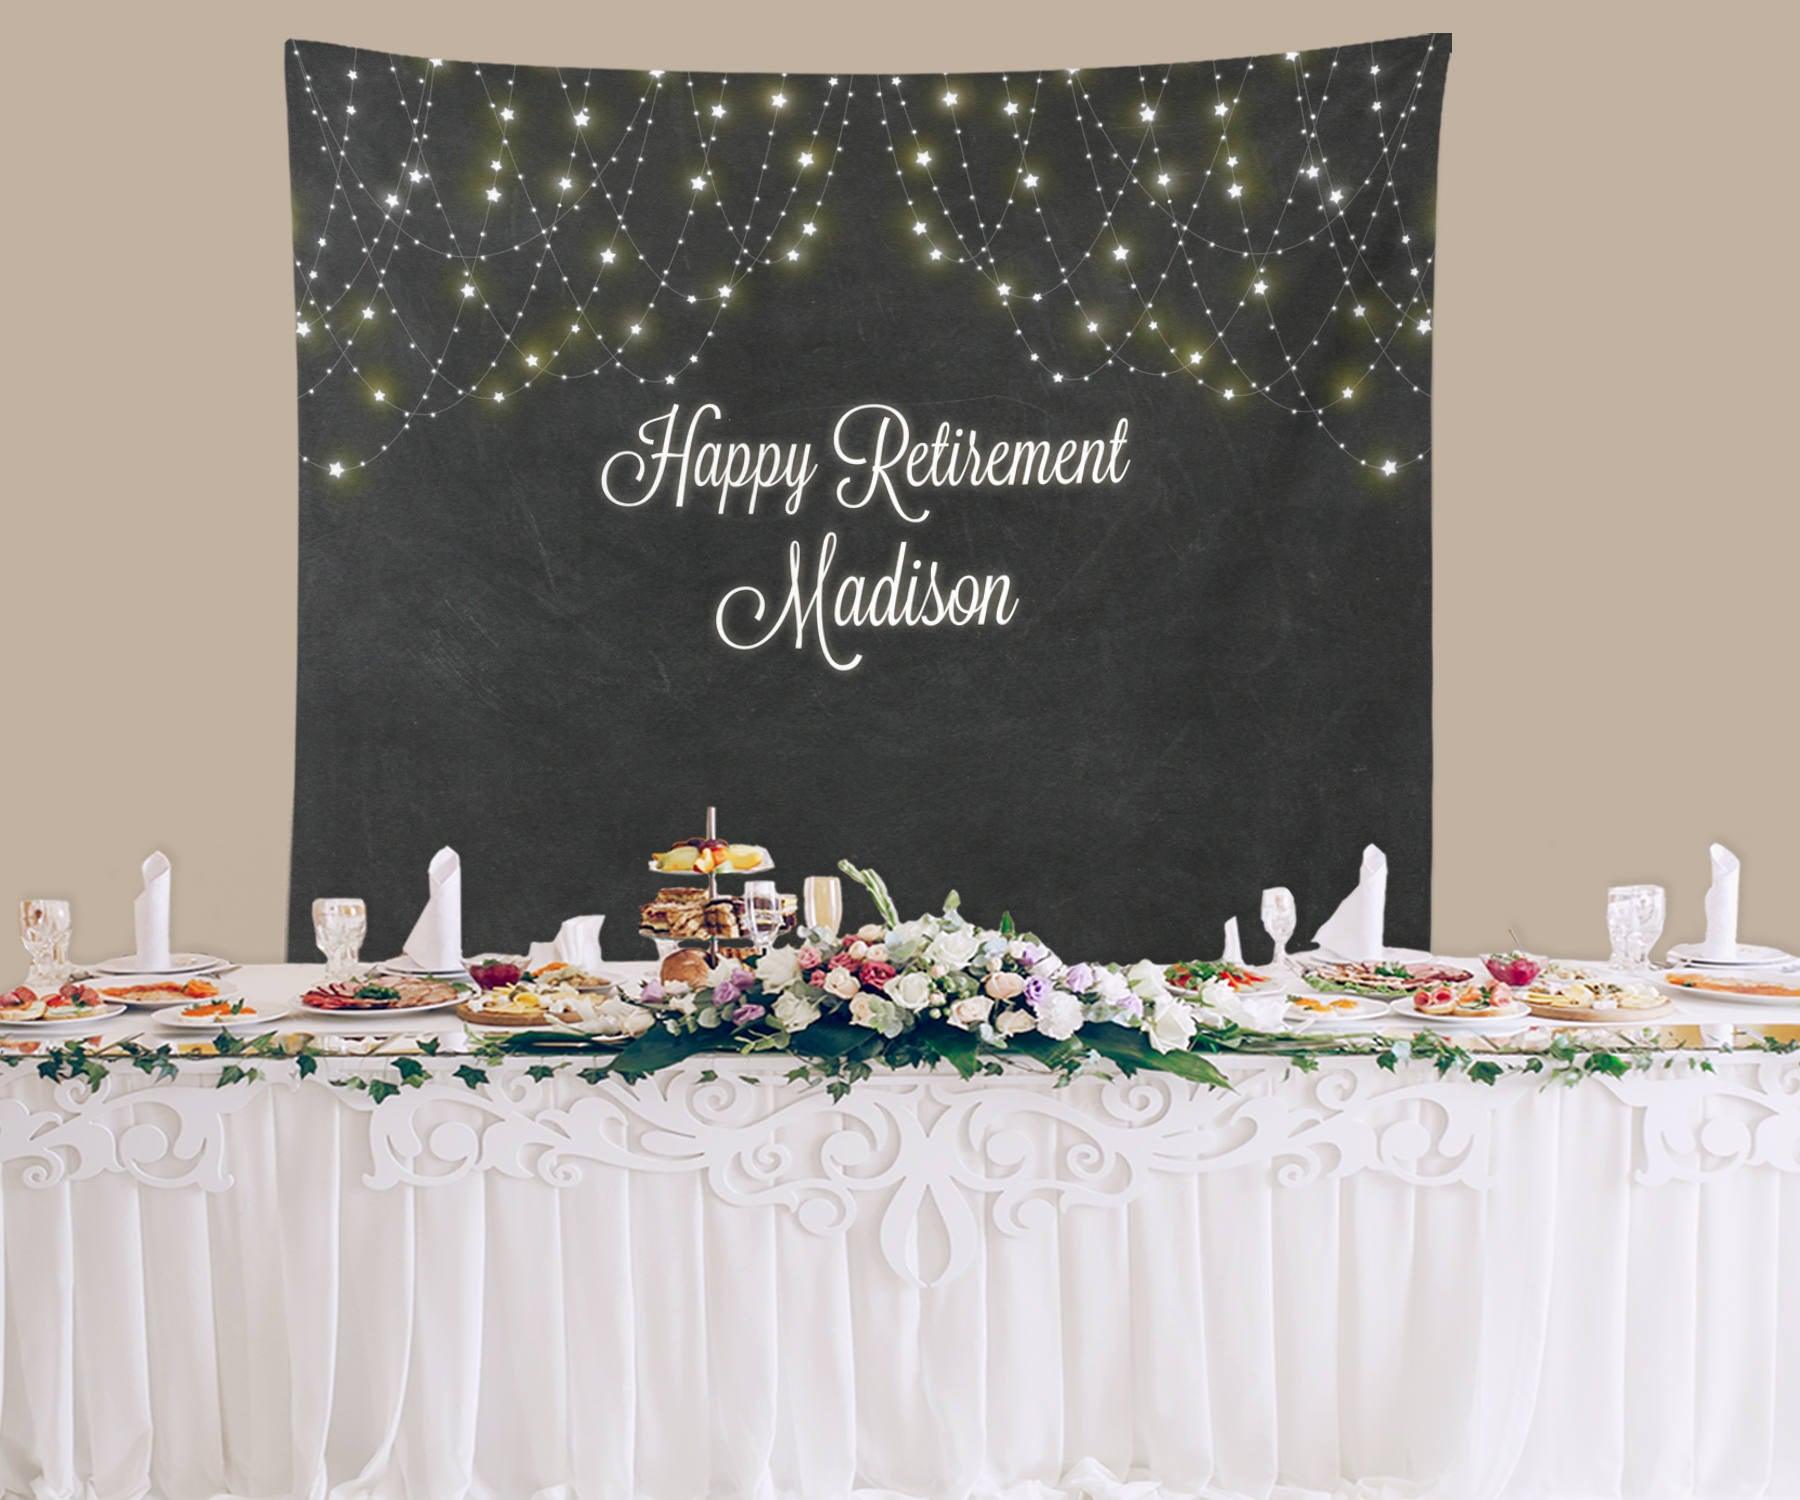 retirement party banners